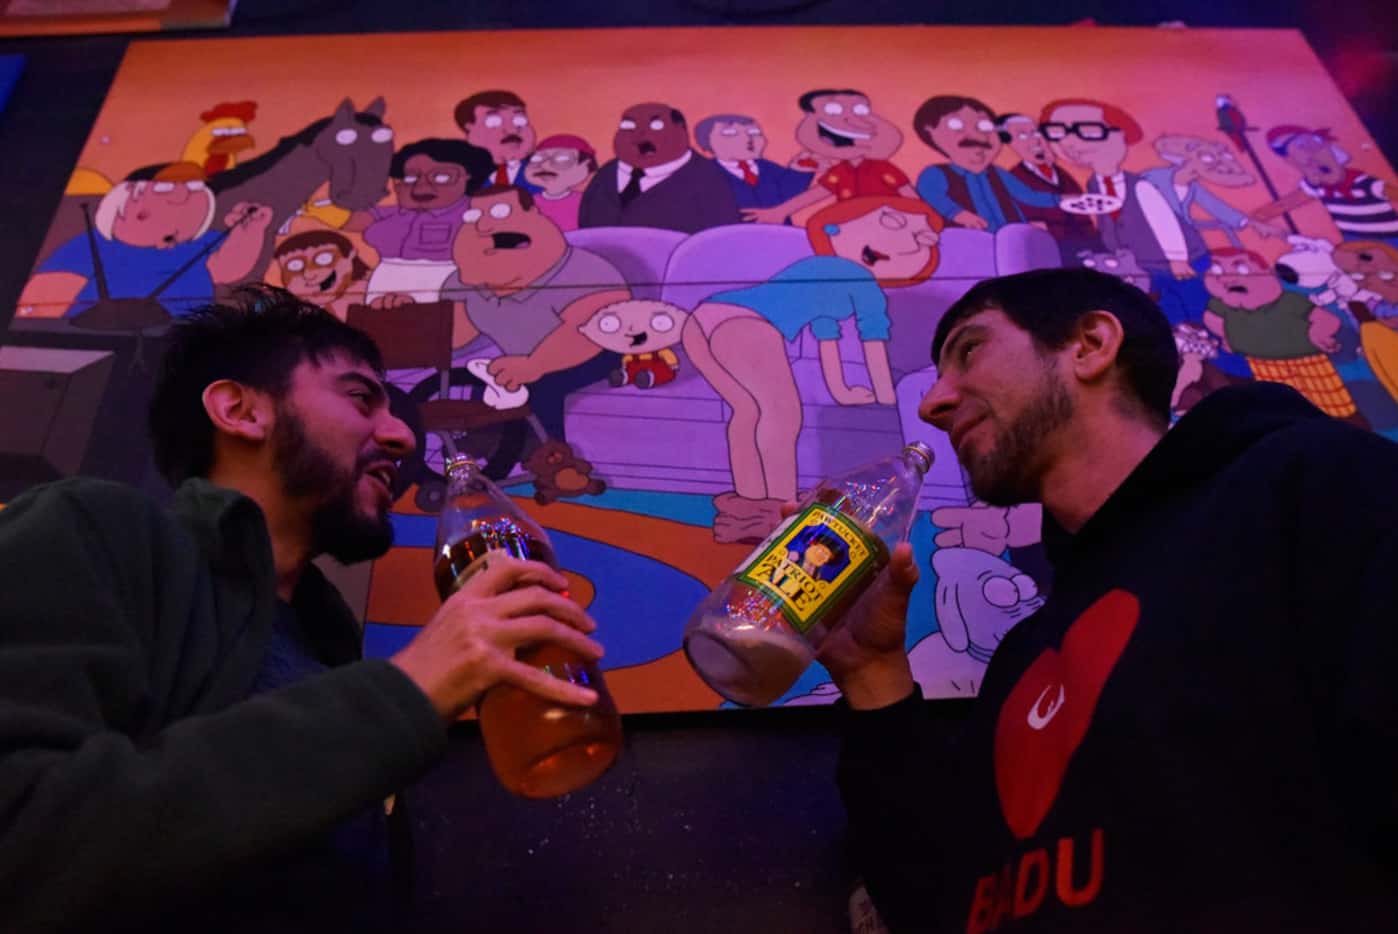 Nick Vasquez, 25, and Bob Warke, 40, drink 40 oz beers near Family Guy art work inside the...